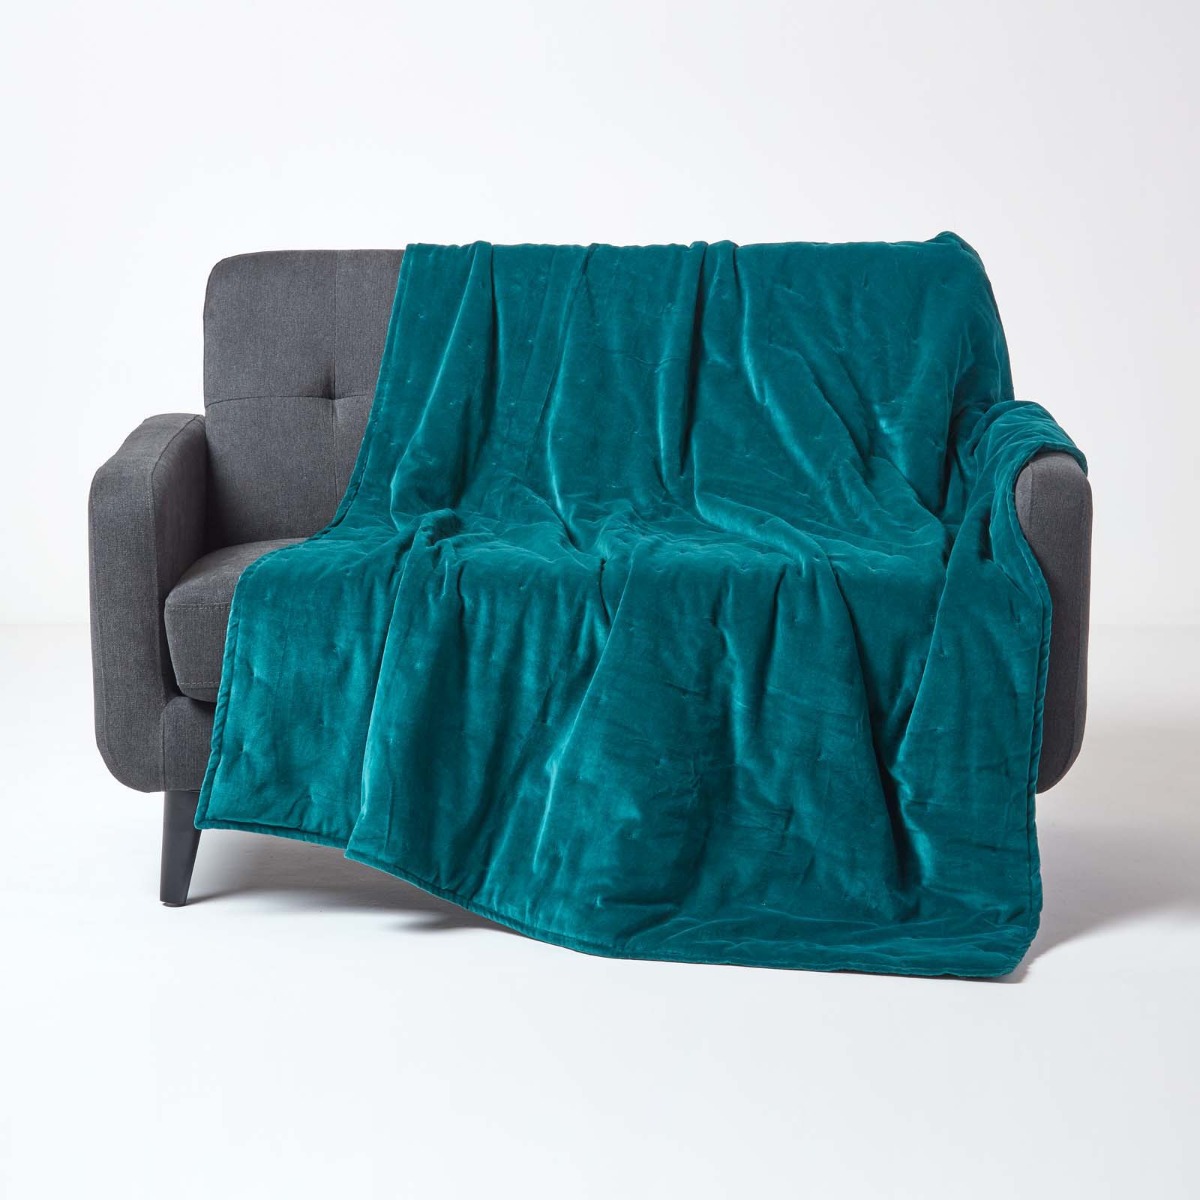 Emerald Green Velvet Quilted Throw, Emerald Green Throws For Sofas